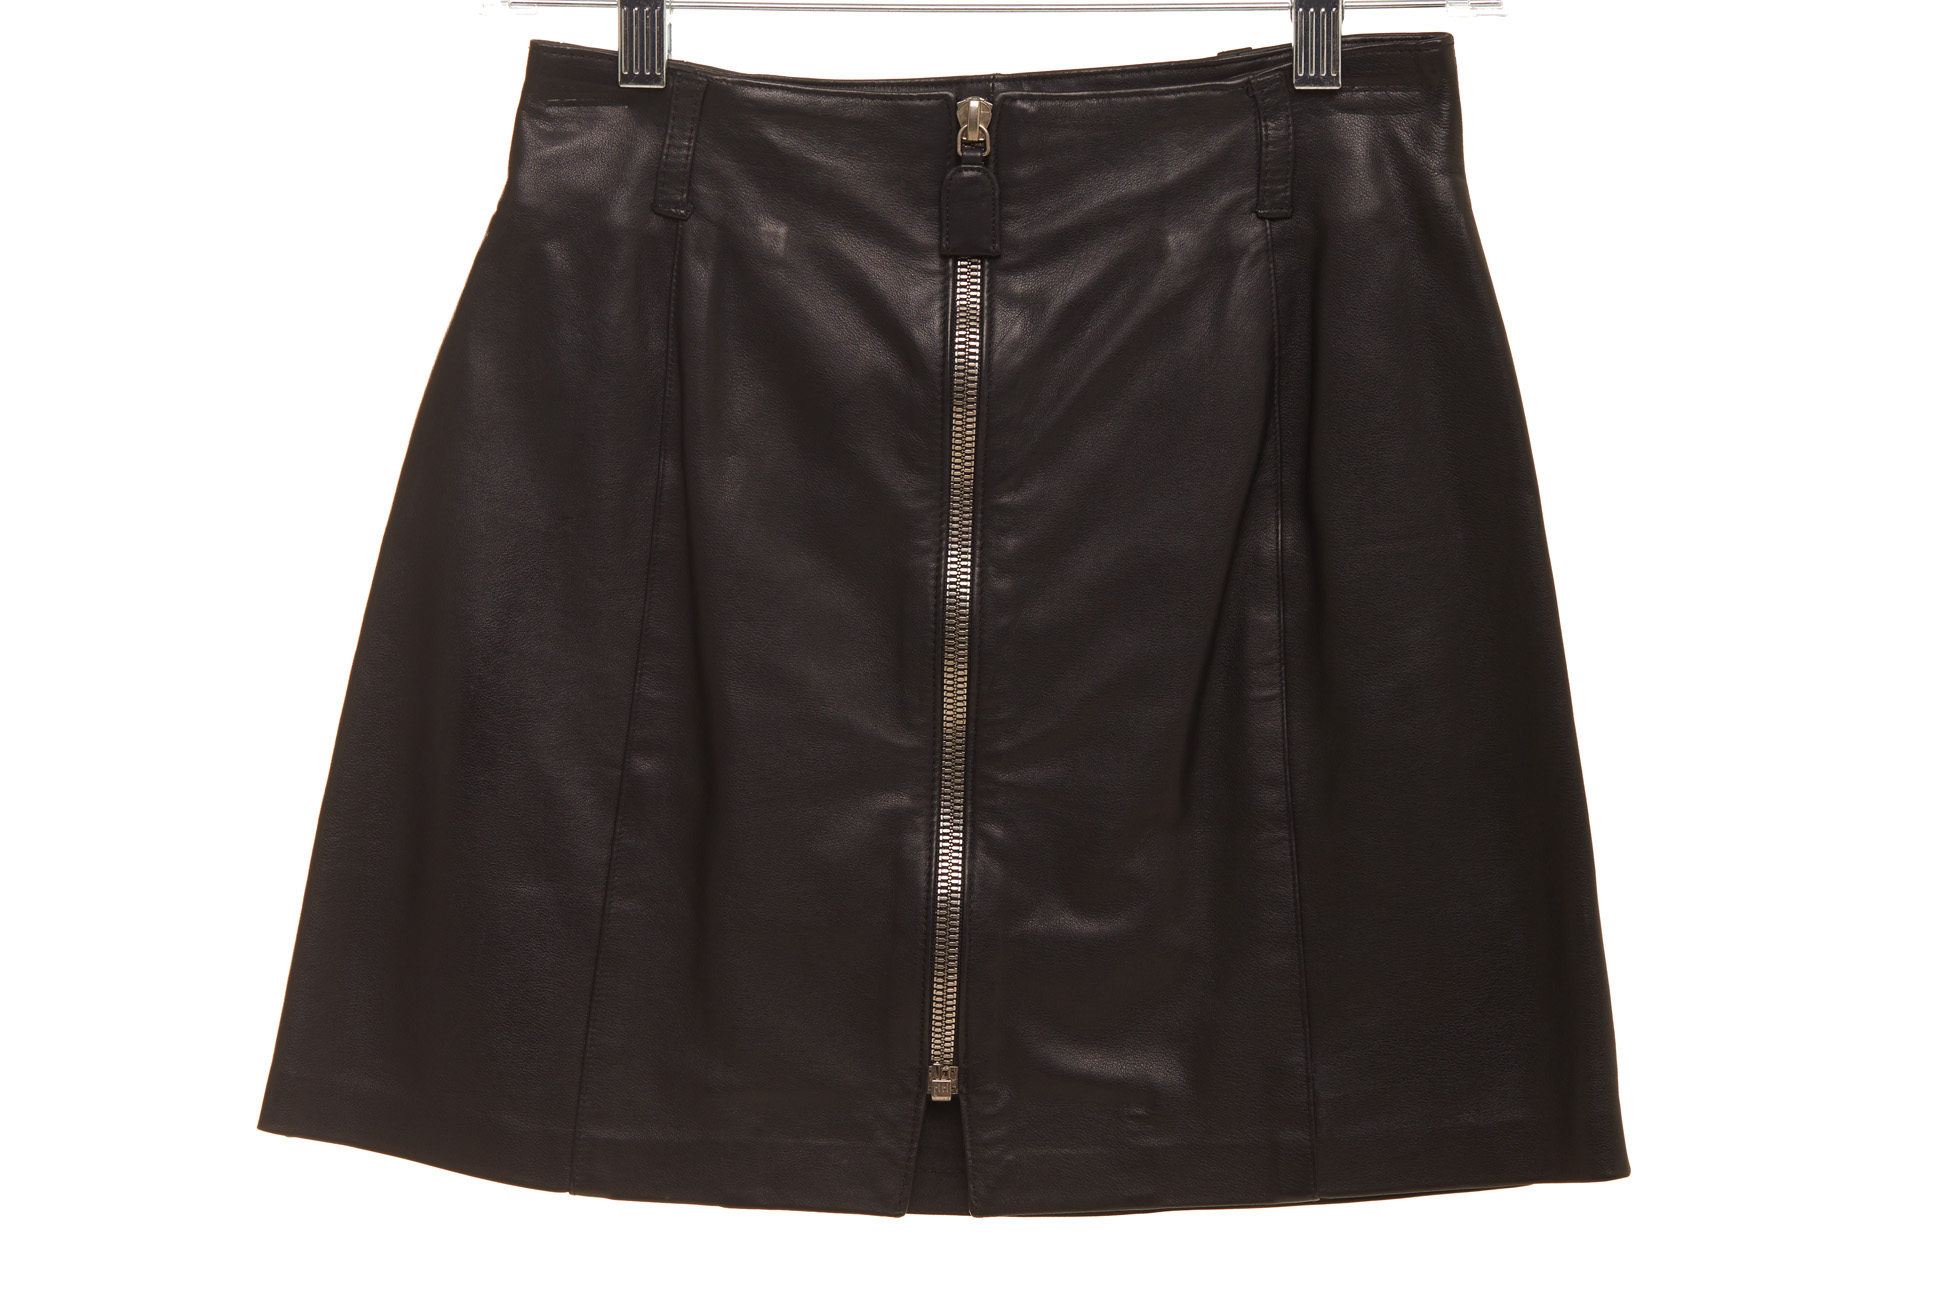 A PRADA LEATHER AND NYLON TWO PIECE VEST AND SKIRT - Image 2 of 4